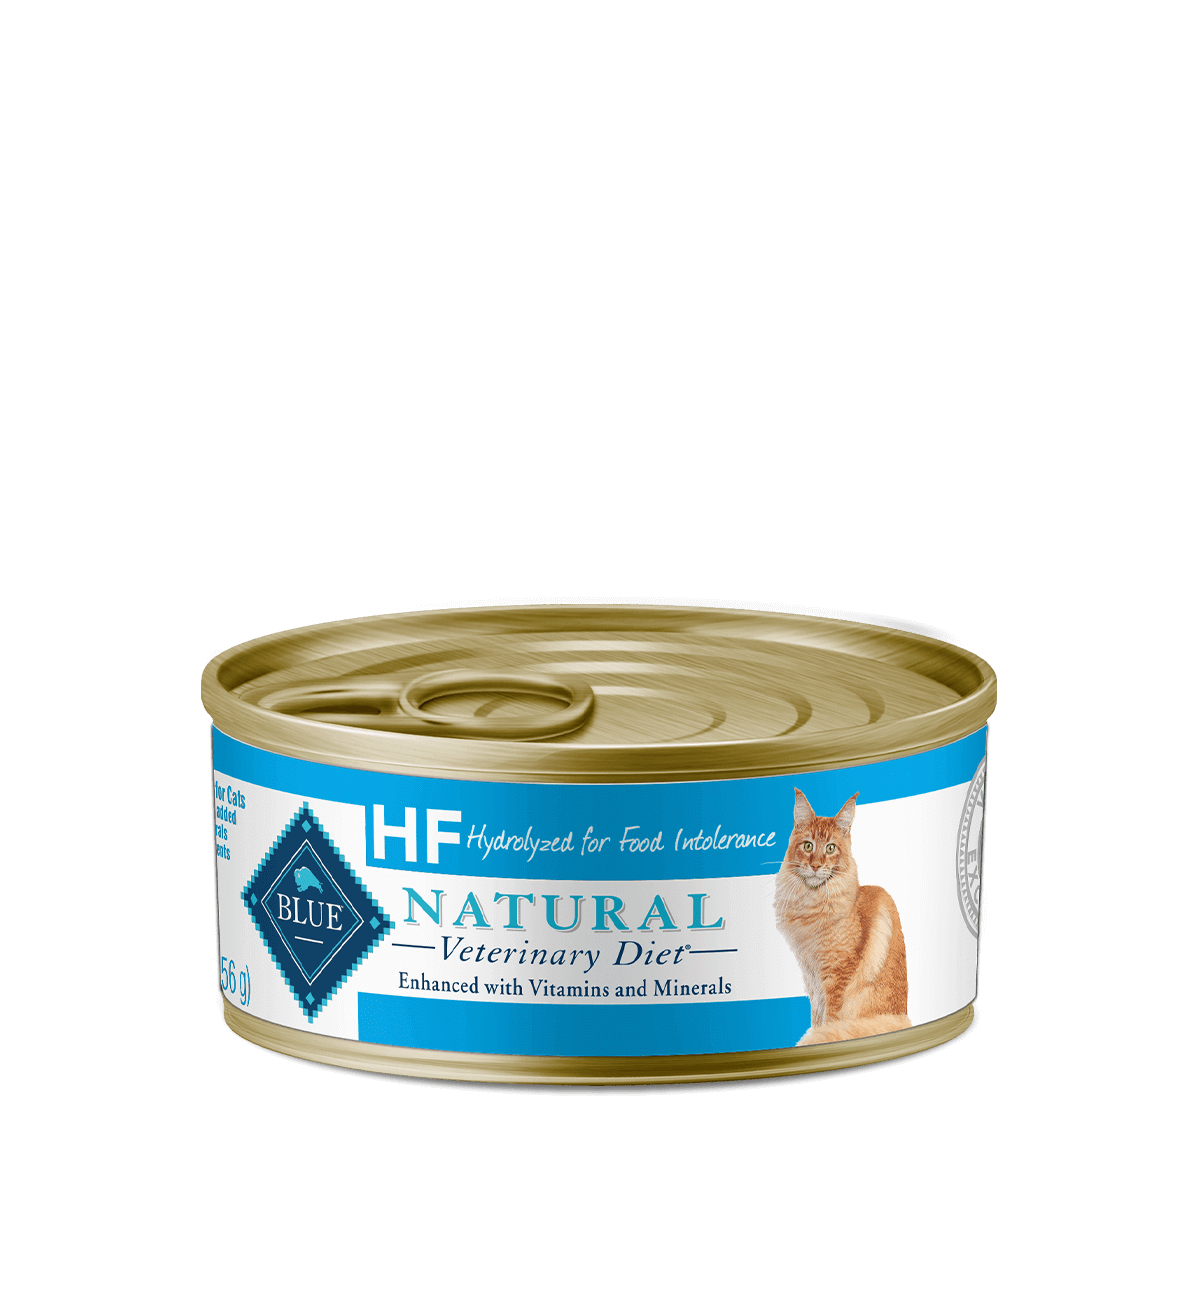 blue natural veterinary diet hf hydrolyzed for food intolerance cat wet food